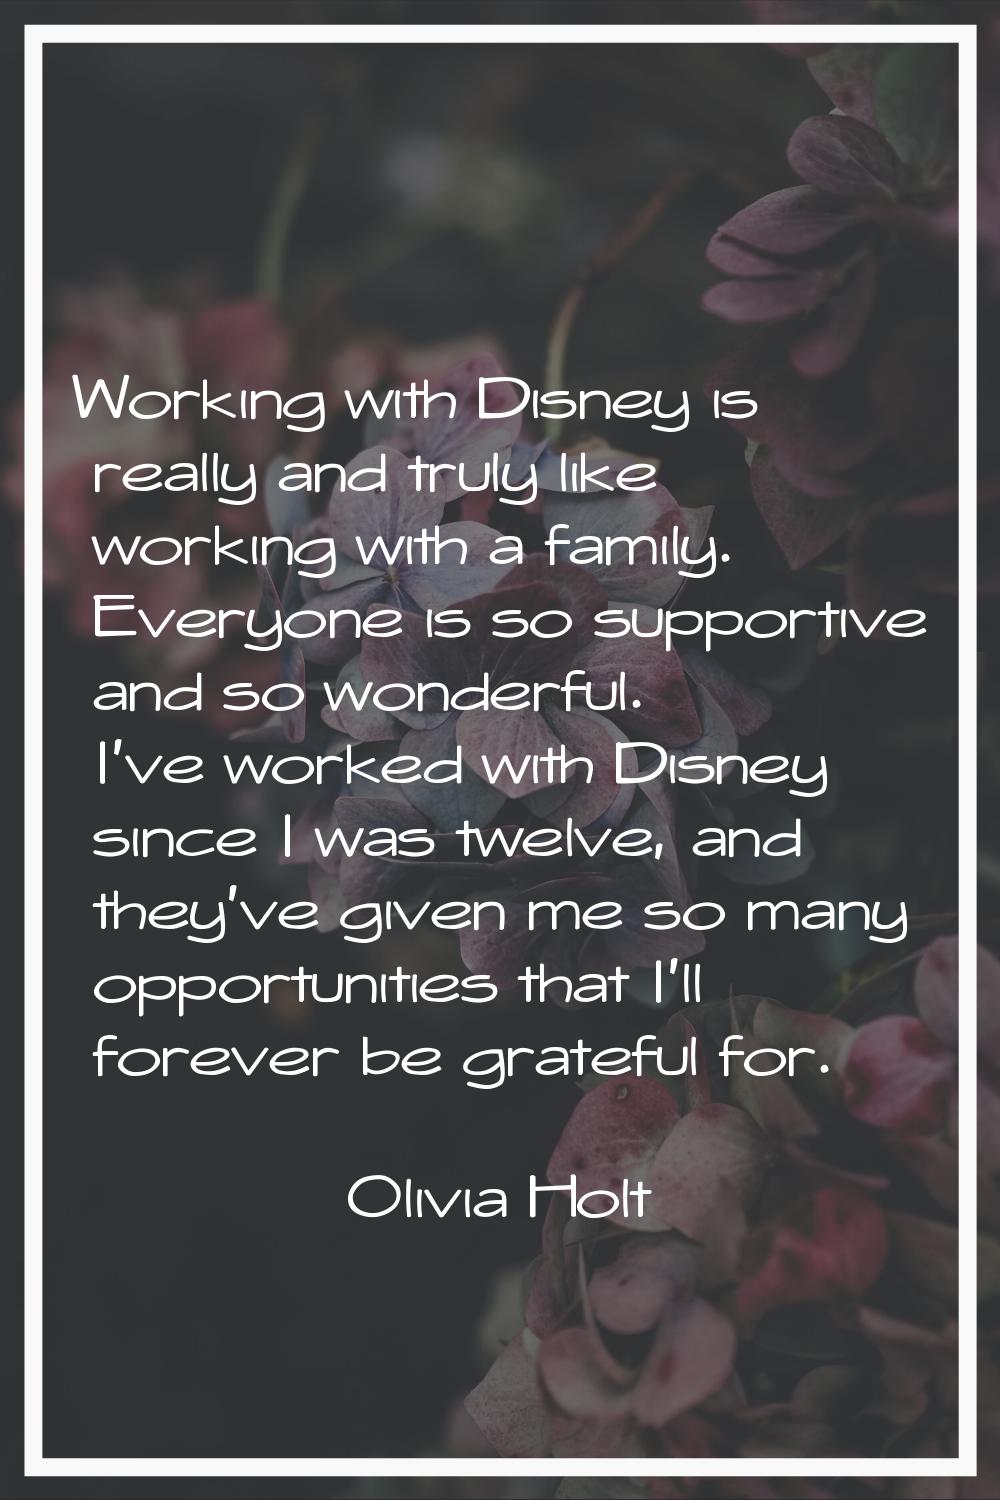 Working with Disney is really and truly like working with a family. Everyone is so supportive and s